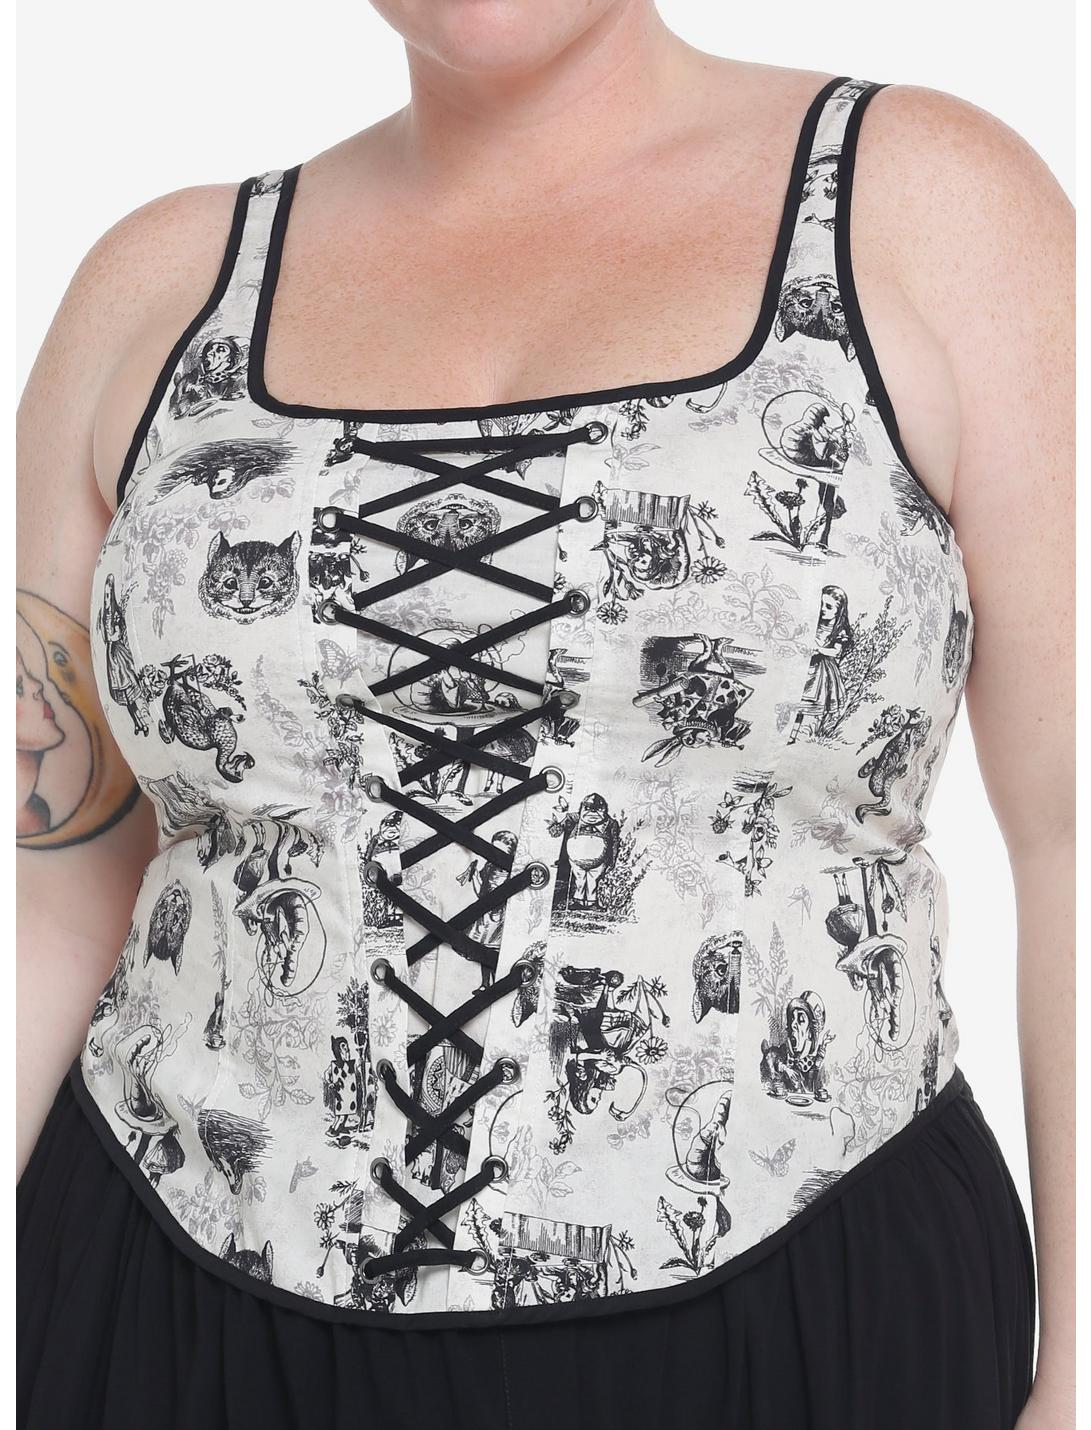 Thorn & Fable Through The Looking Glass Sketch Girls Corset Top Plus Size, MULTI, hi-res